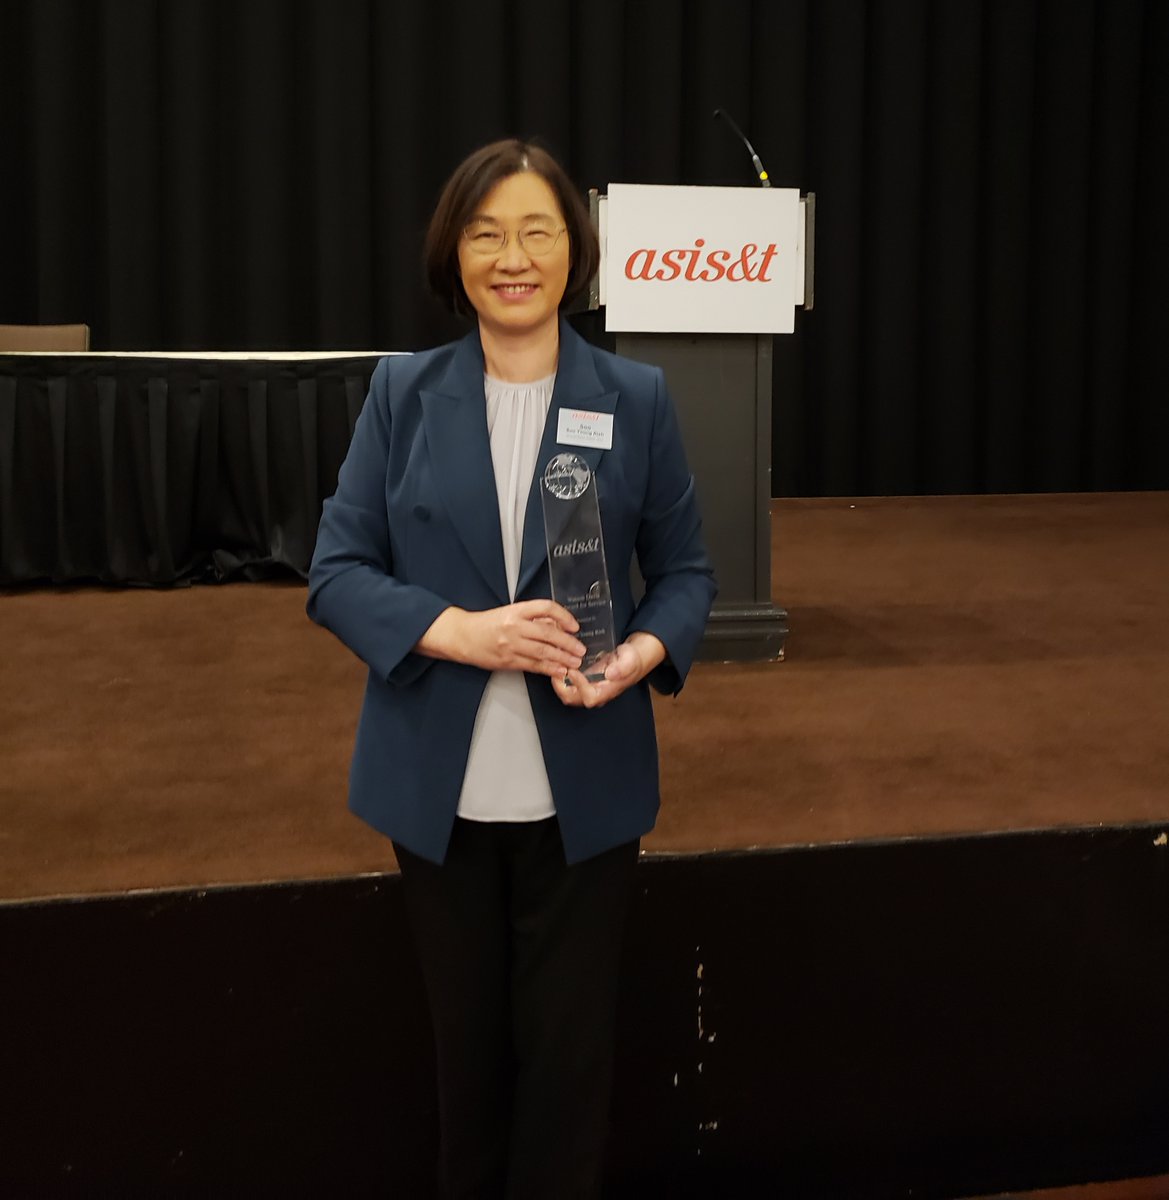 I am so pleased, honored, and humbled to receive the ASIS&T Watson Davis Award for Service today #ASIST22. @asist_org has been a big part of my professional life. I feel so blessed I have had many opportunities to work with amazing mentors and friends over the years. Thank you.